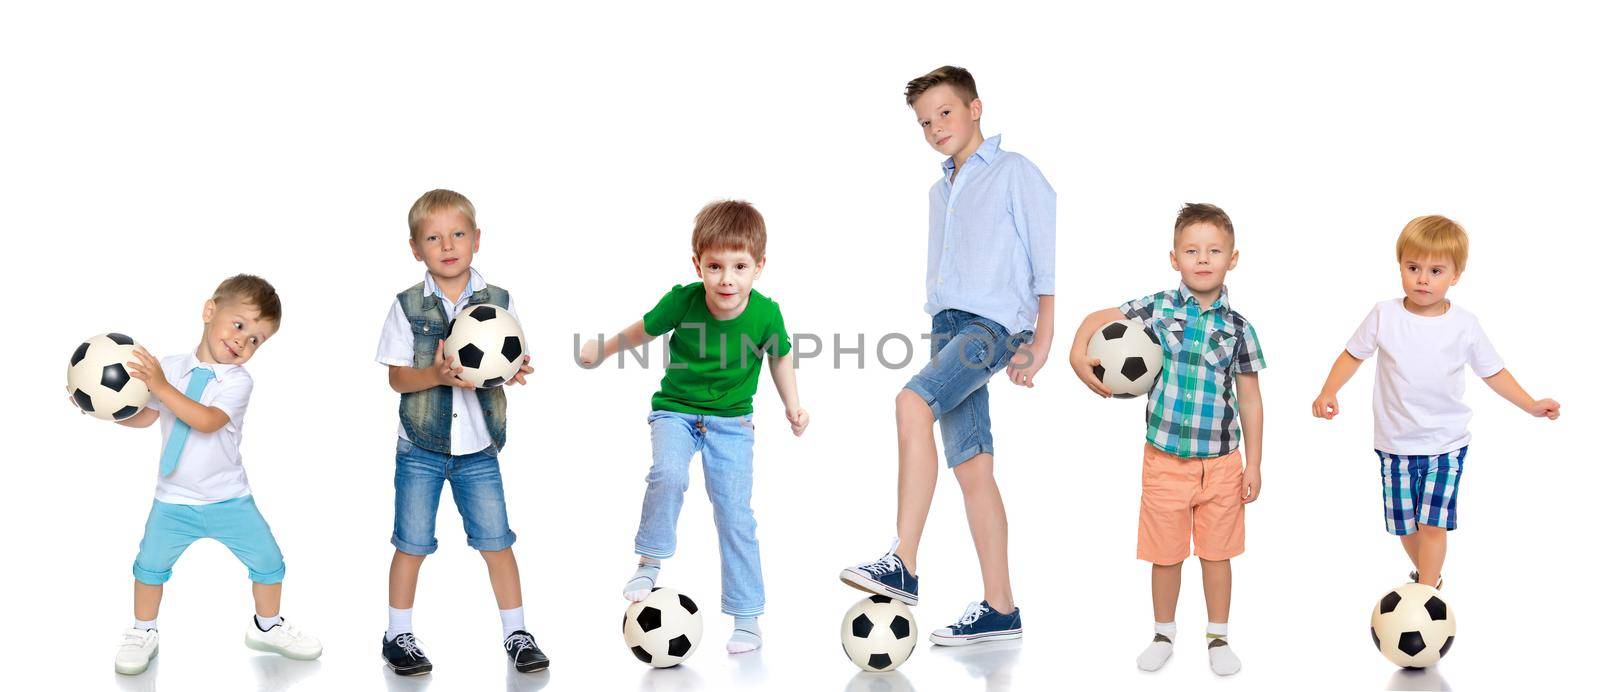 A large group of children and teenagers playing with a soccer ball. The concept of children's sport, a healthy lifestyle. Isolated on white background.